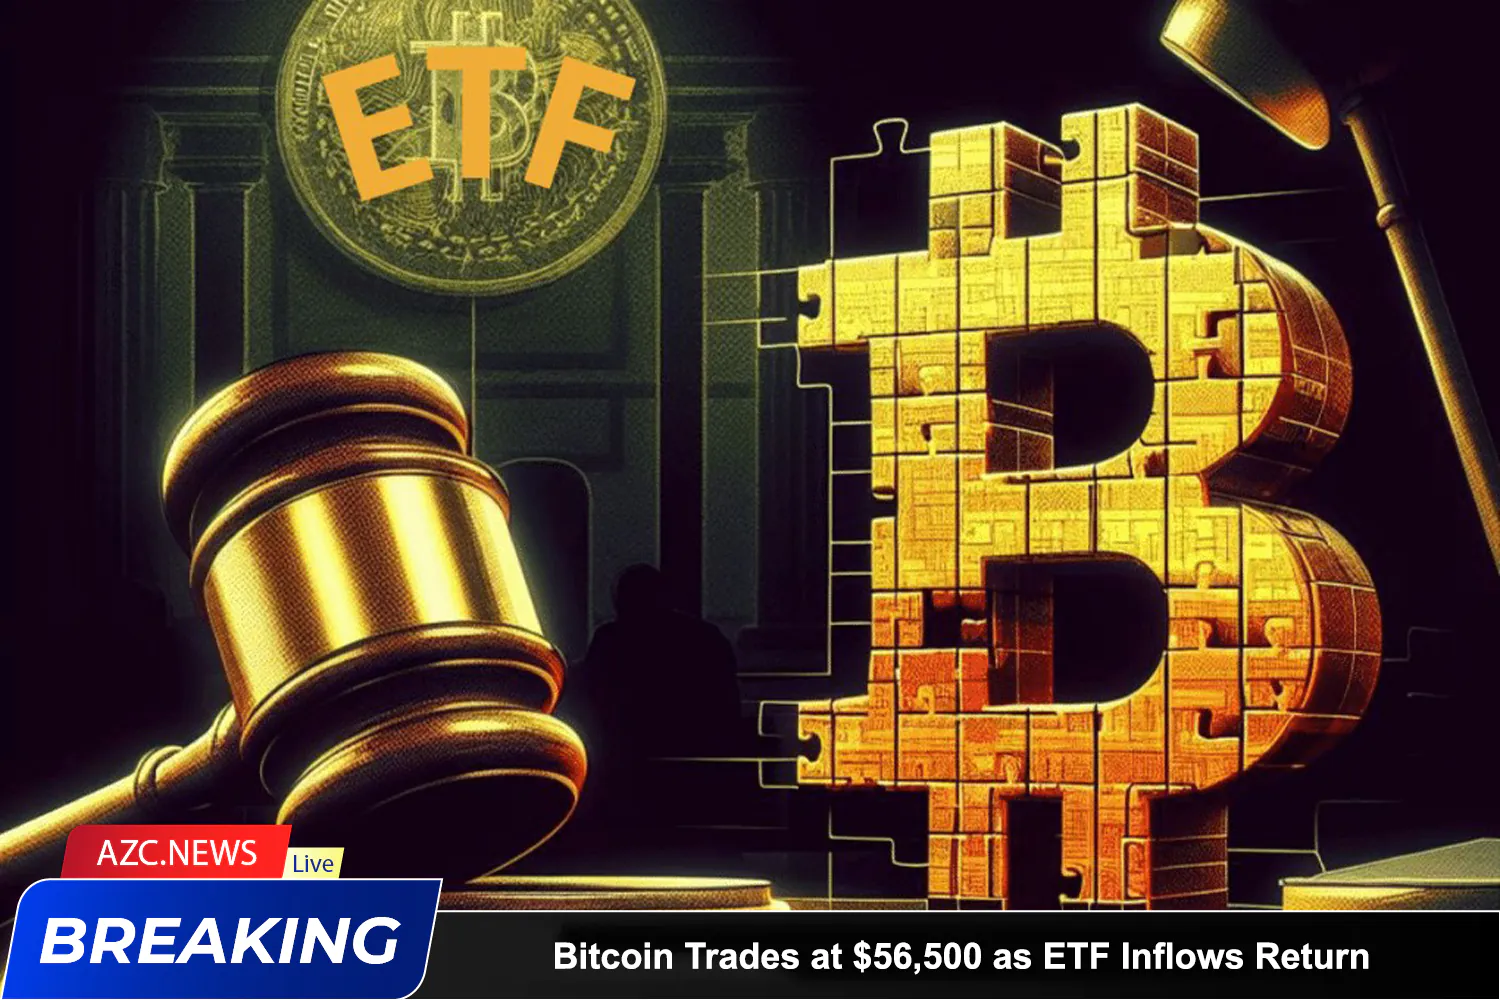 Azcnews Bitcoin Trades At $56,500 As Etf Inflows Return